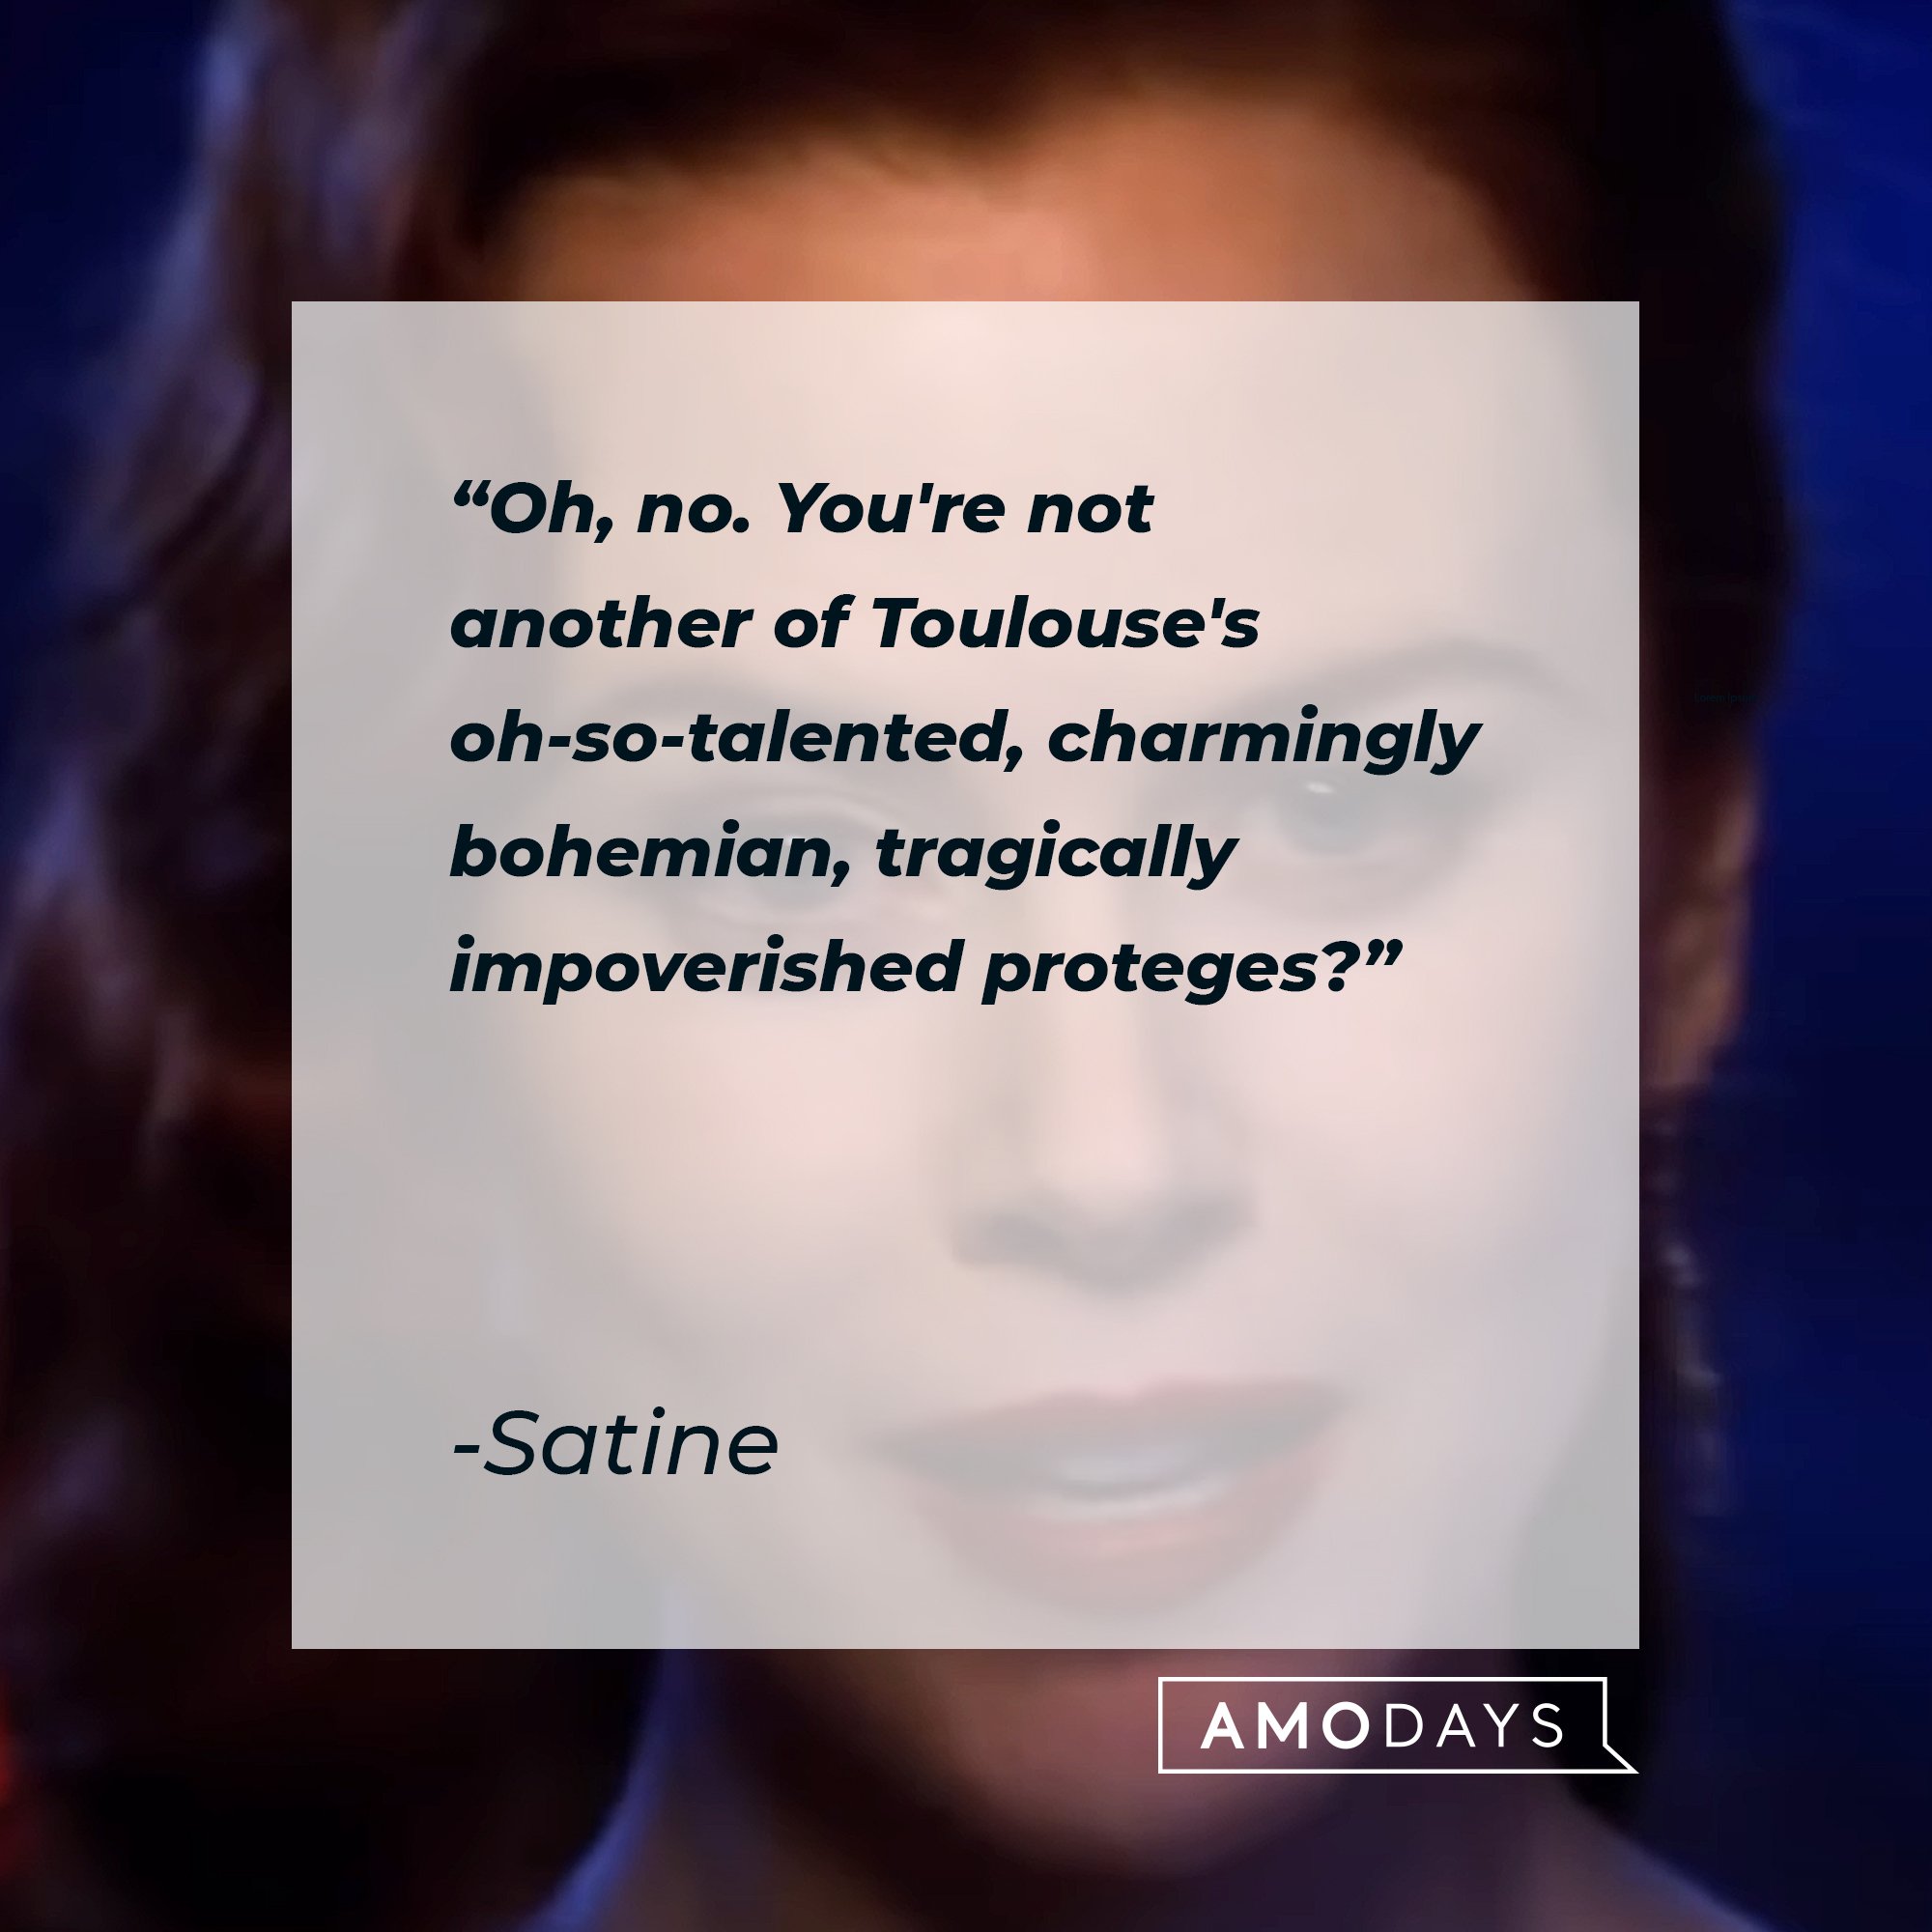  Satine's quote: "Oh, no. You're not another of Toulouse's oh-so-talented, charmingly bohemian, tragically impoverished proteges?"  | Image: AmoDays